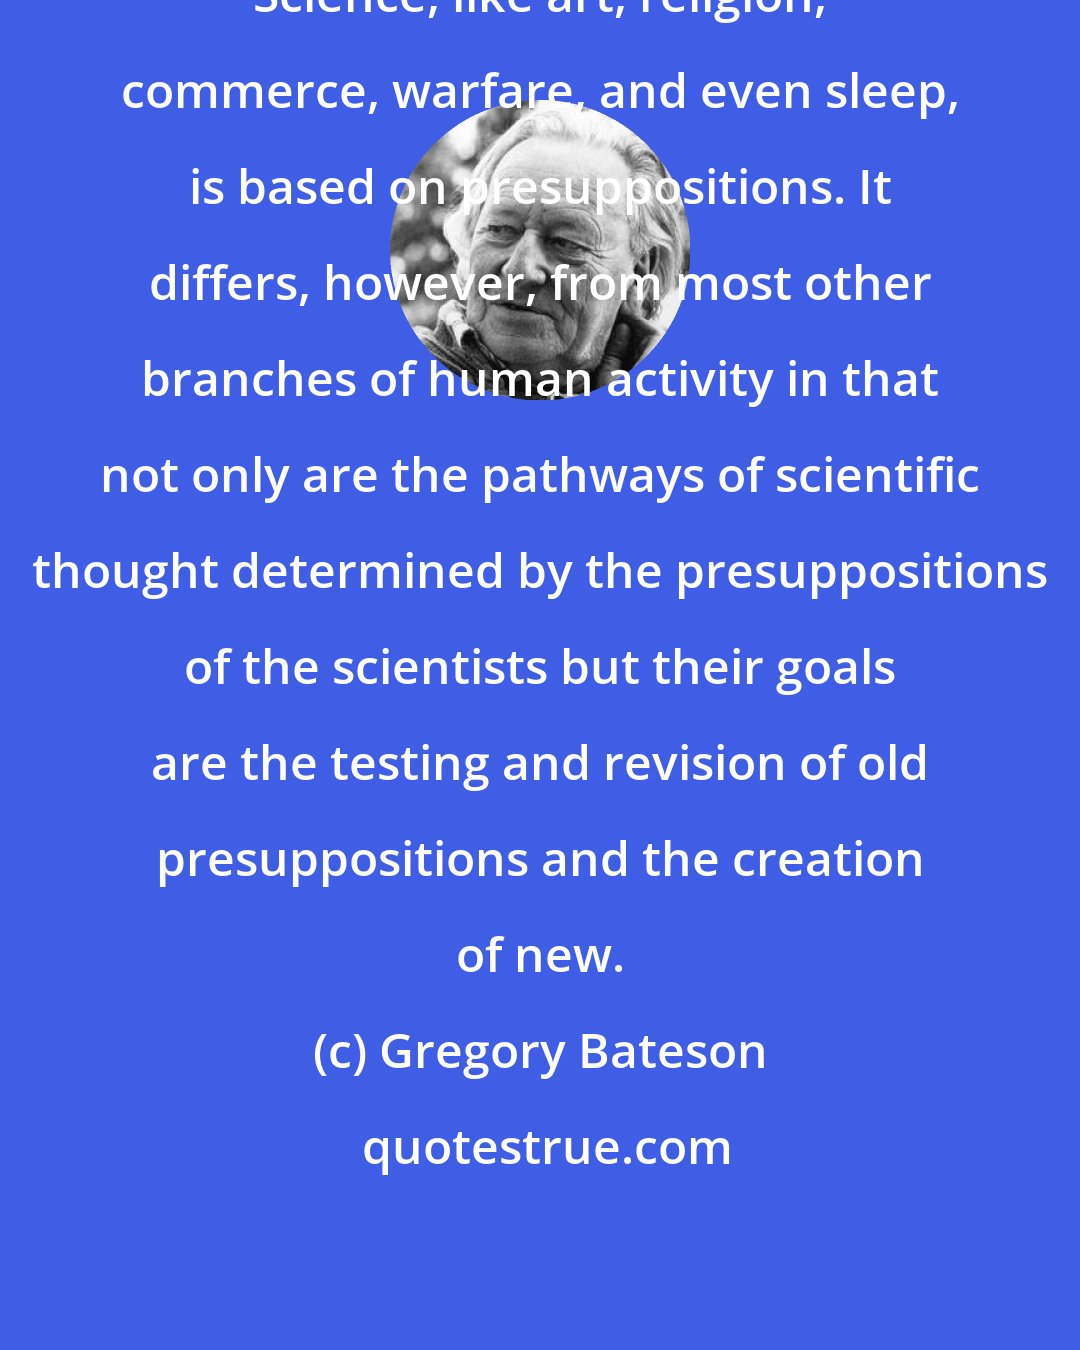 Gregory Bateson: Science, like art, religion, commerce, warfare, and even sleep, is based on presuppositions. It differs, however, from most other branches of human activity in that not only are the pathways of scientific thought determined by the presuppositions of the scientists but their goals are the testing and revision of old presuppositions and the creation of new.